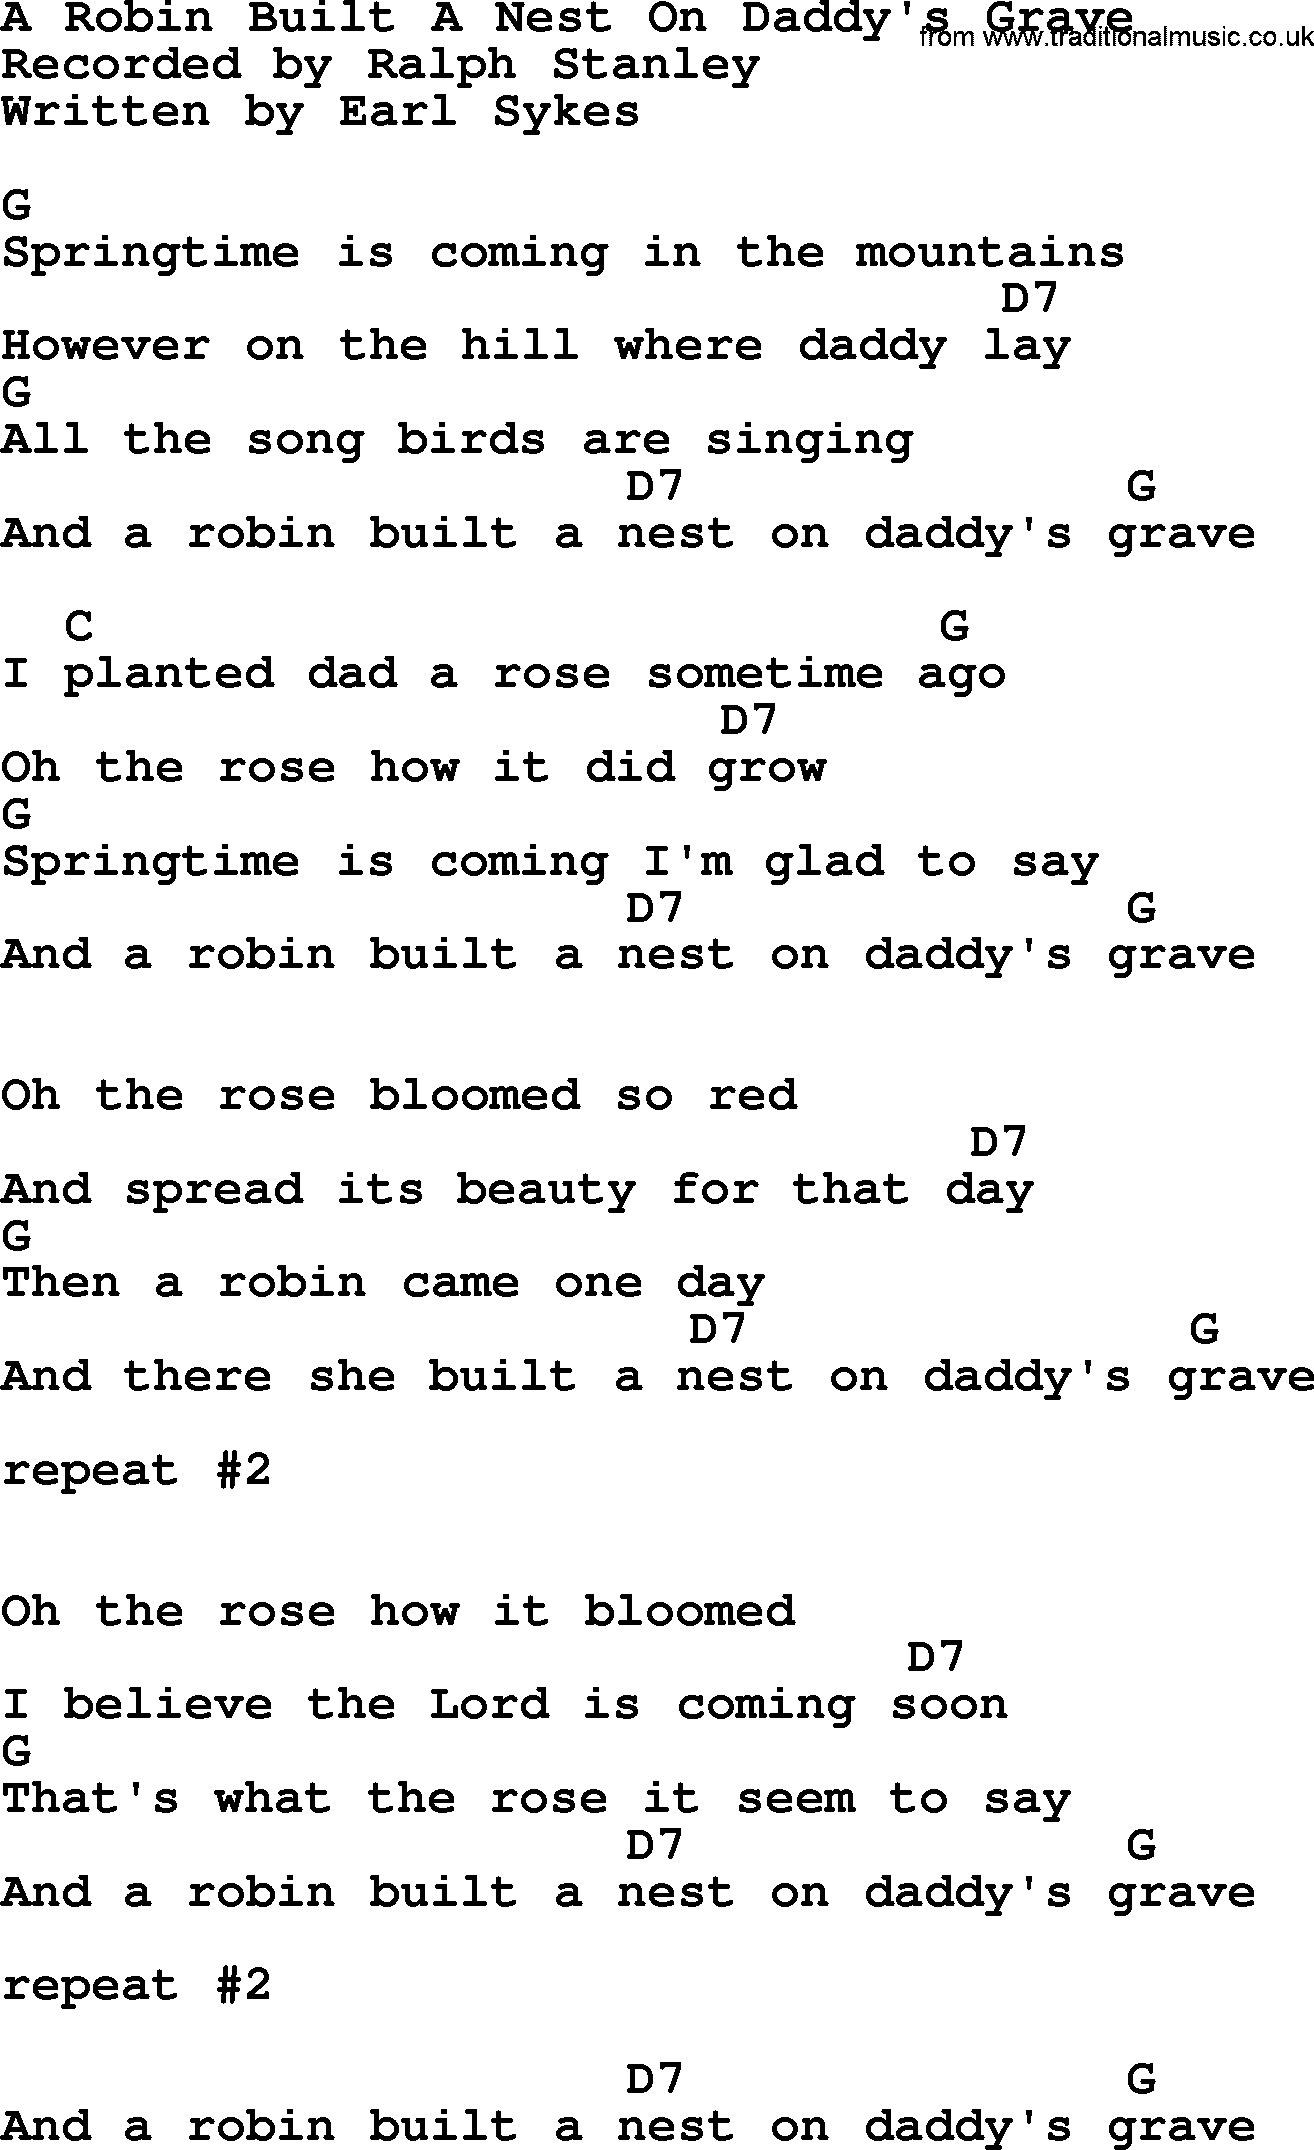 Bluegrass song: A Robin Built A Nest On Daddy's Grave, lyrics and chords